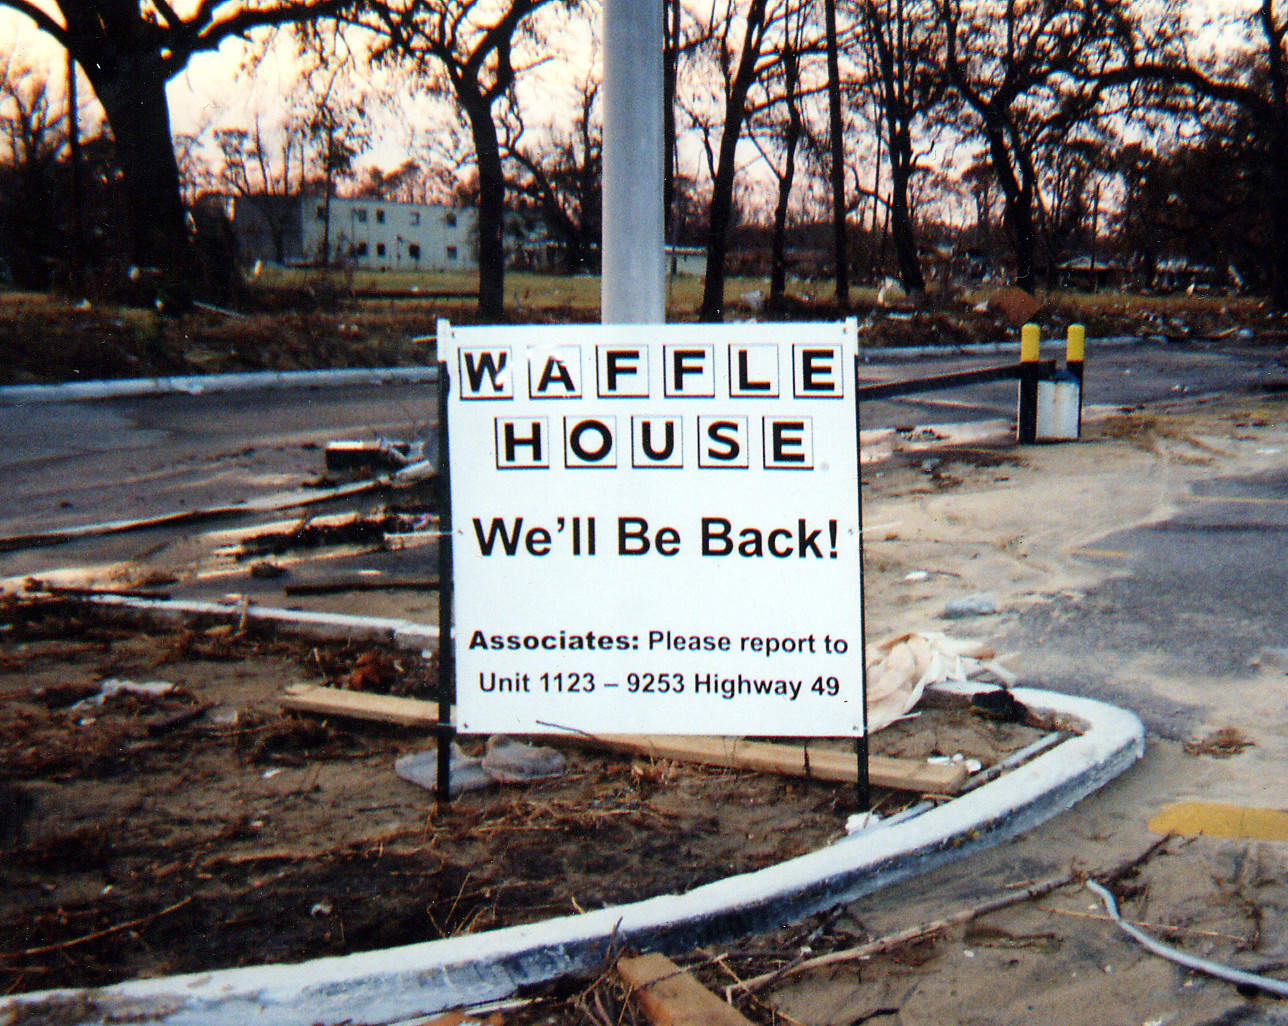 Waffle House will be back soon